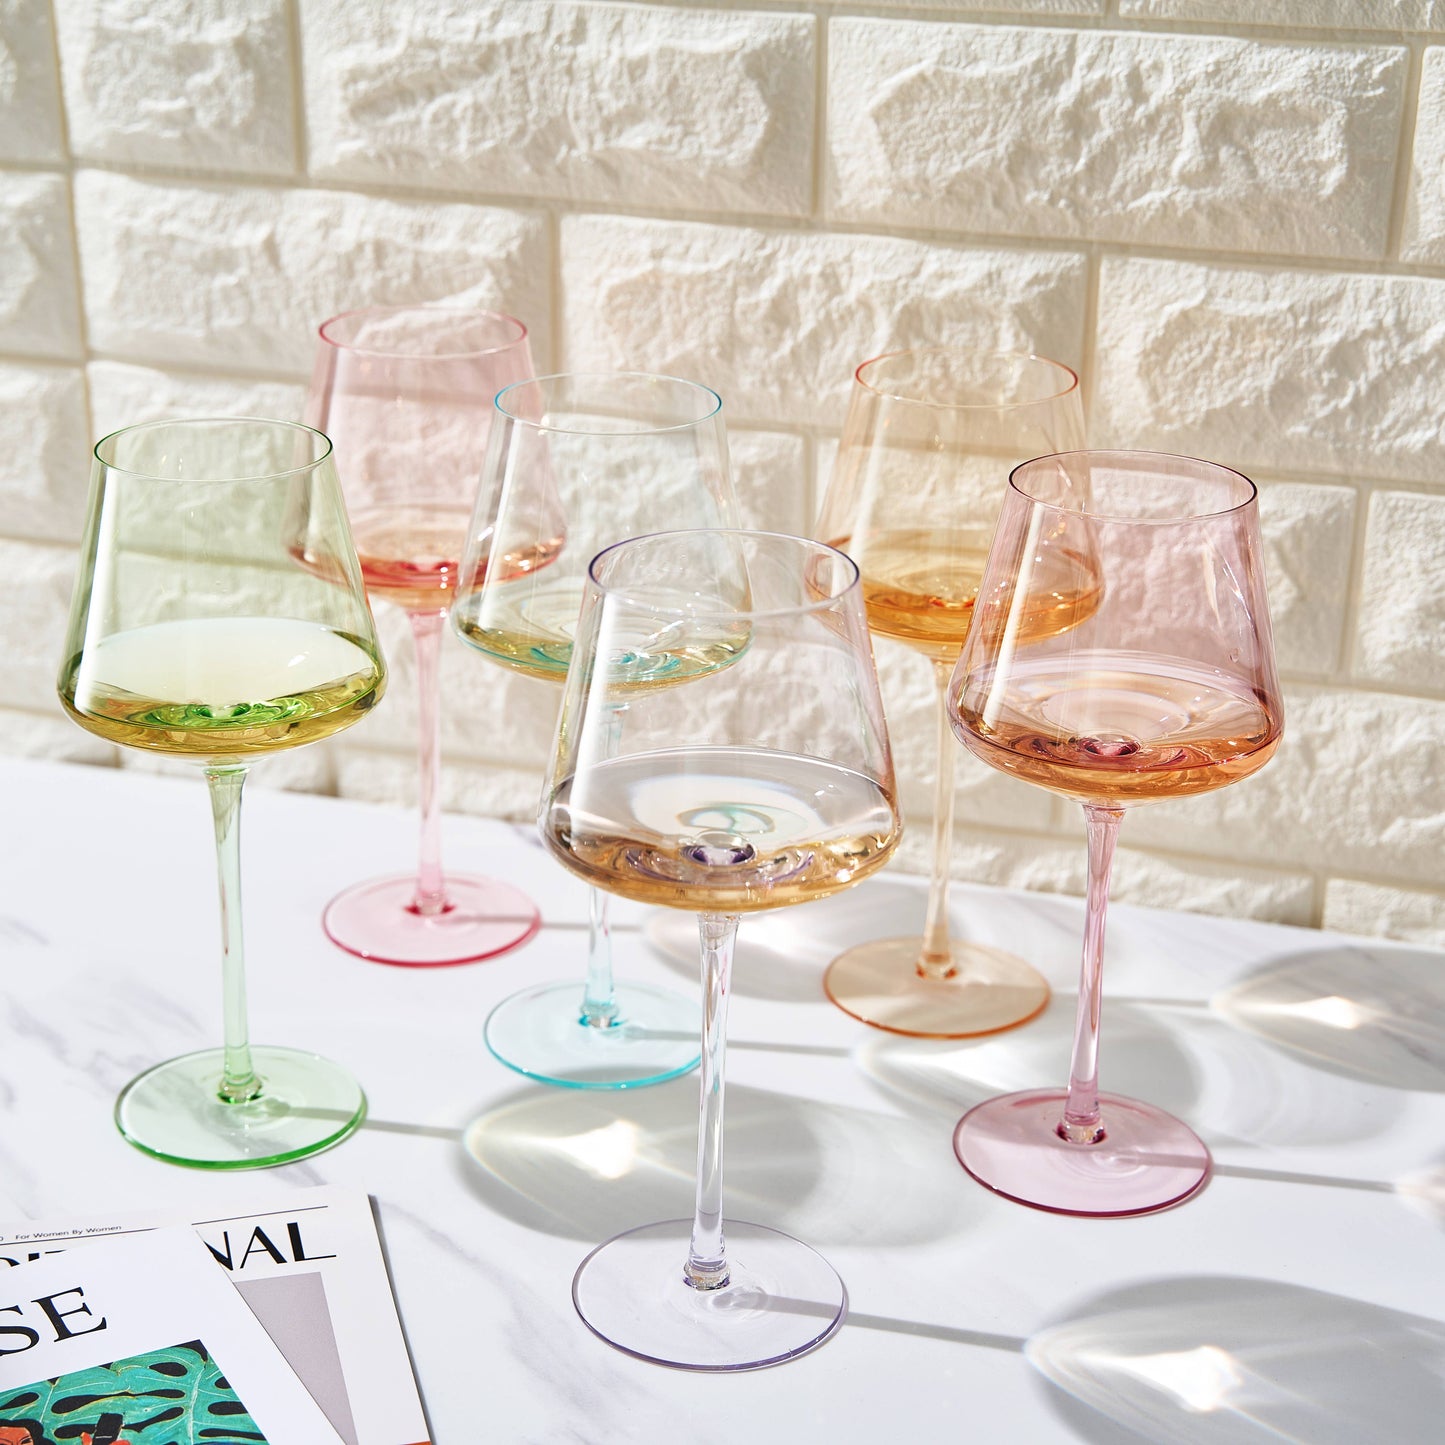 Colored Crystal Wine Glass Set of 6